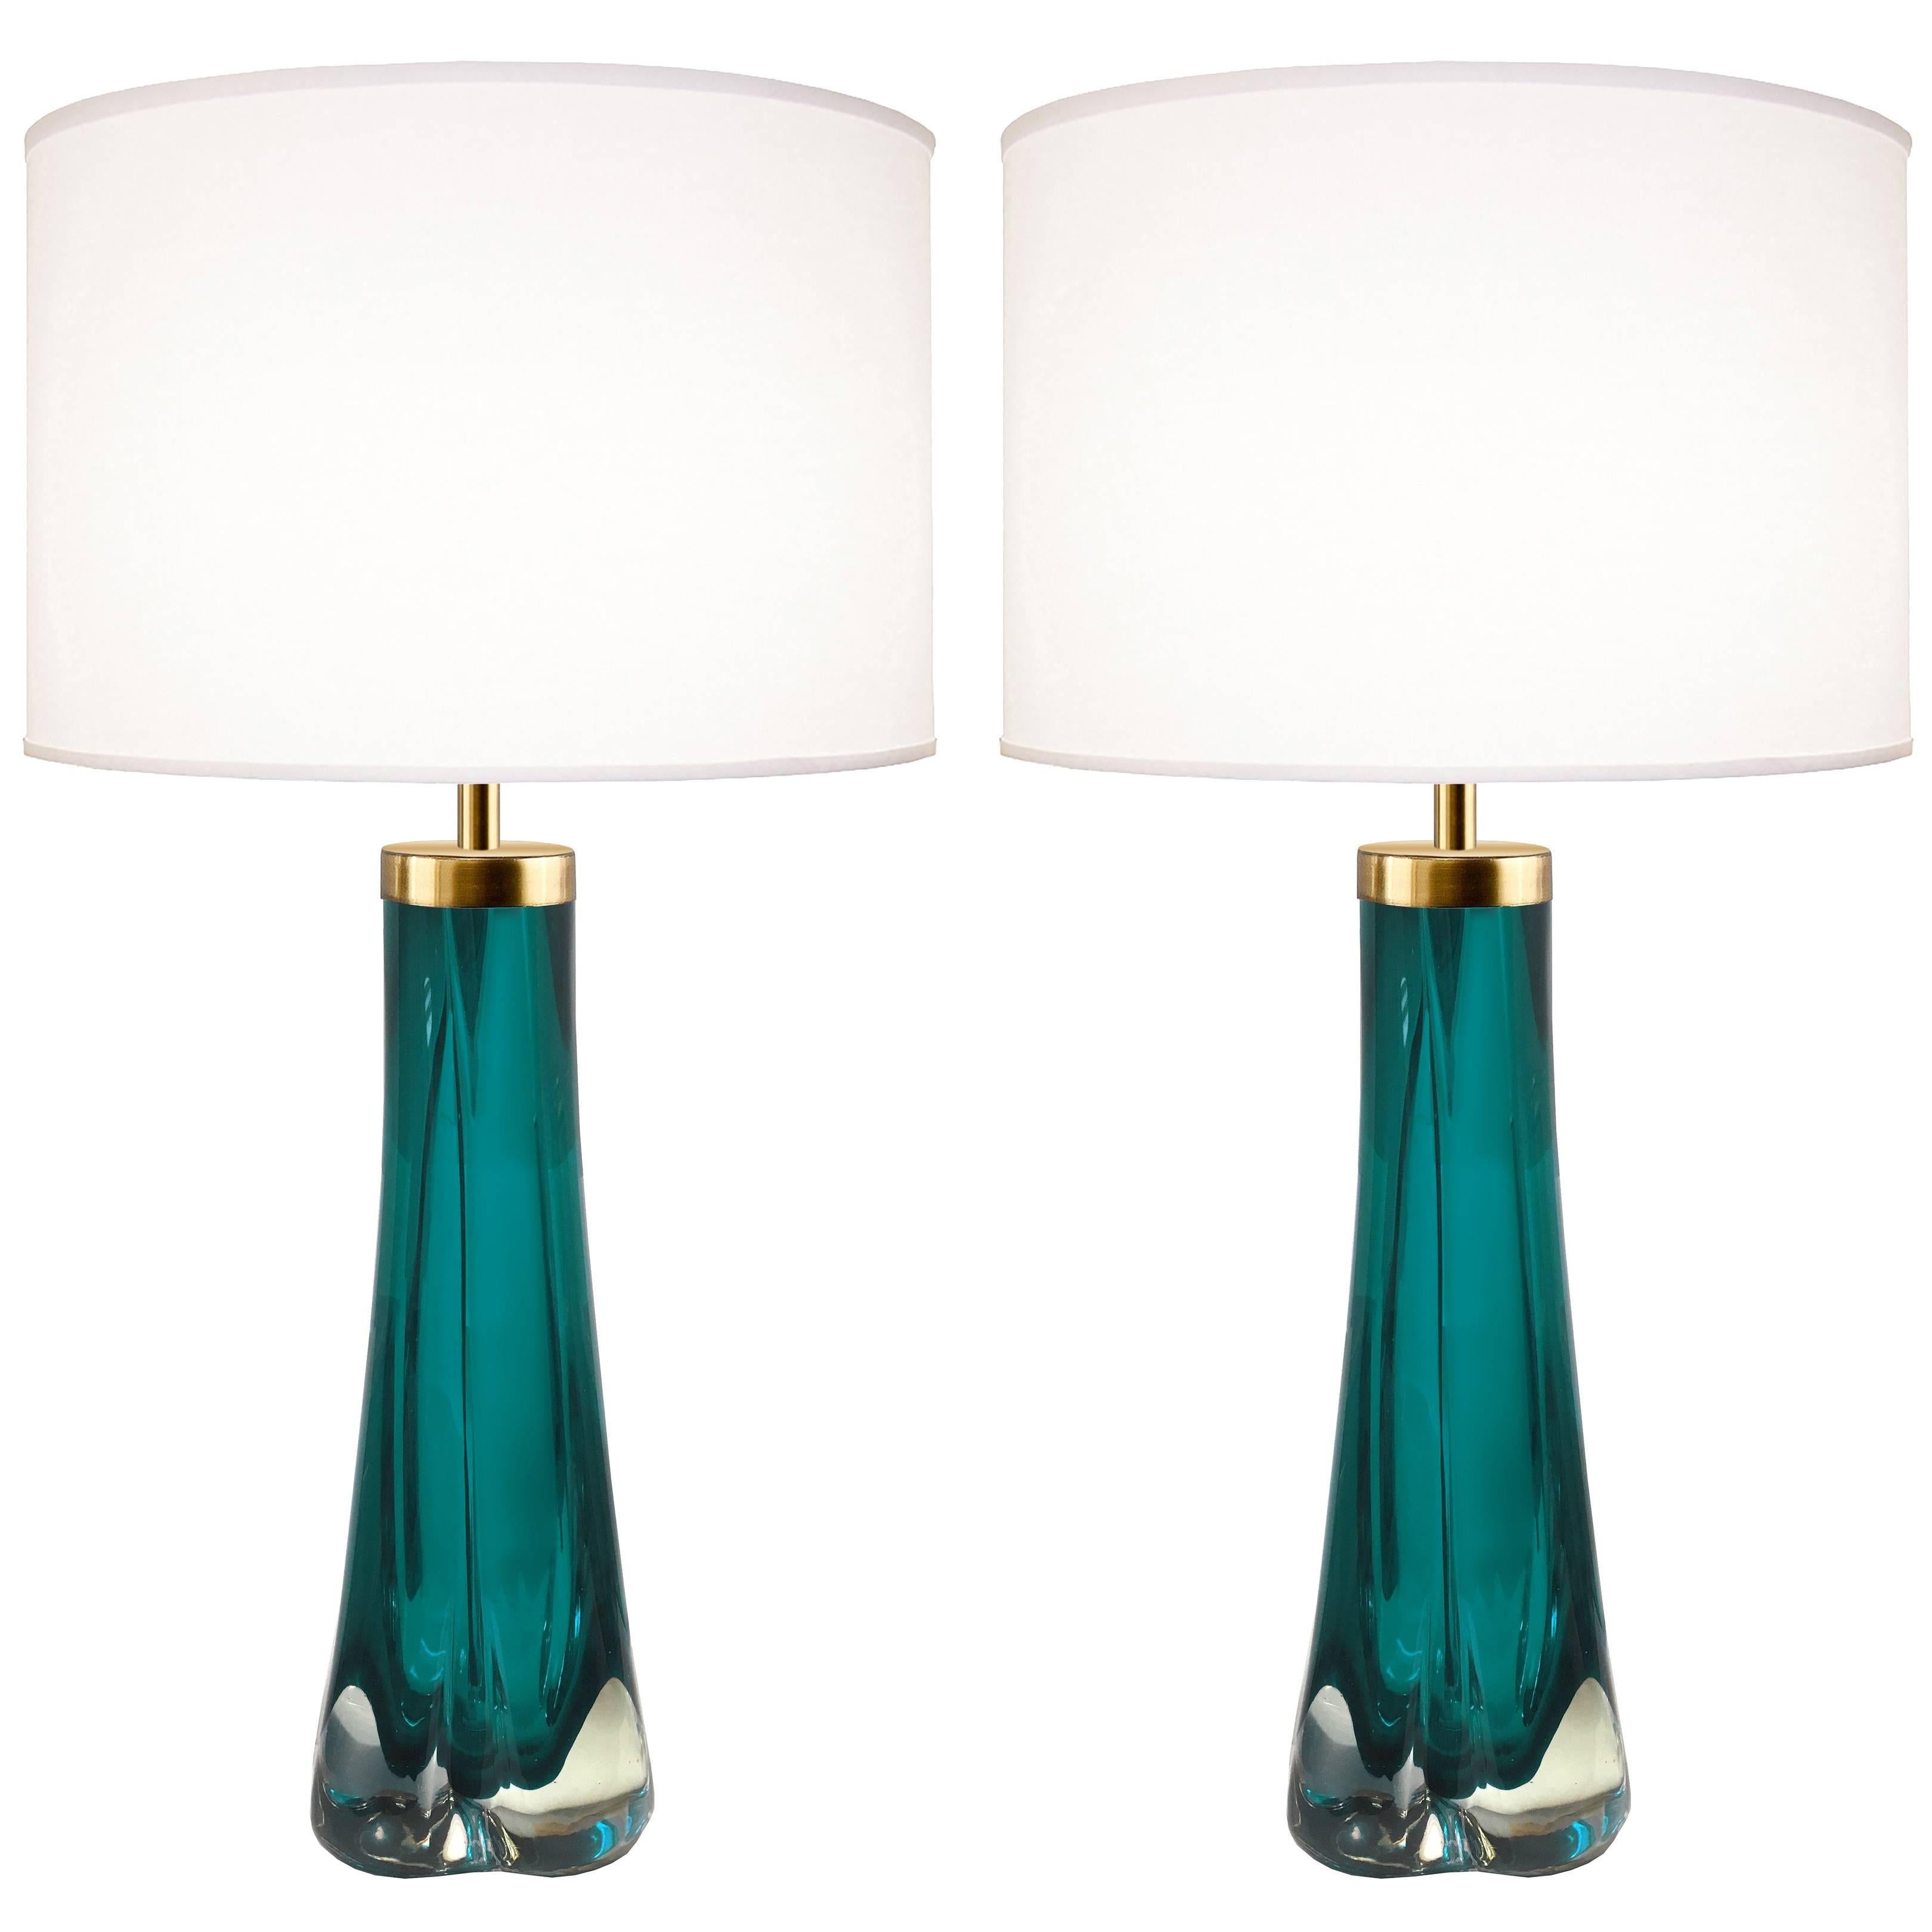 Pair of Thick Cased Aqua Glass Lamps from Craig Van Den Brulle to Order For Sale